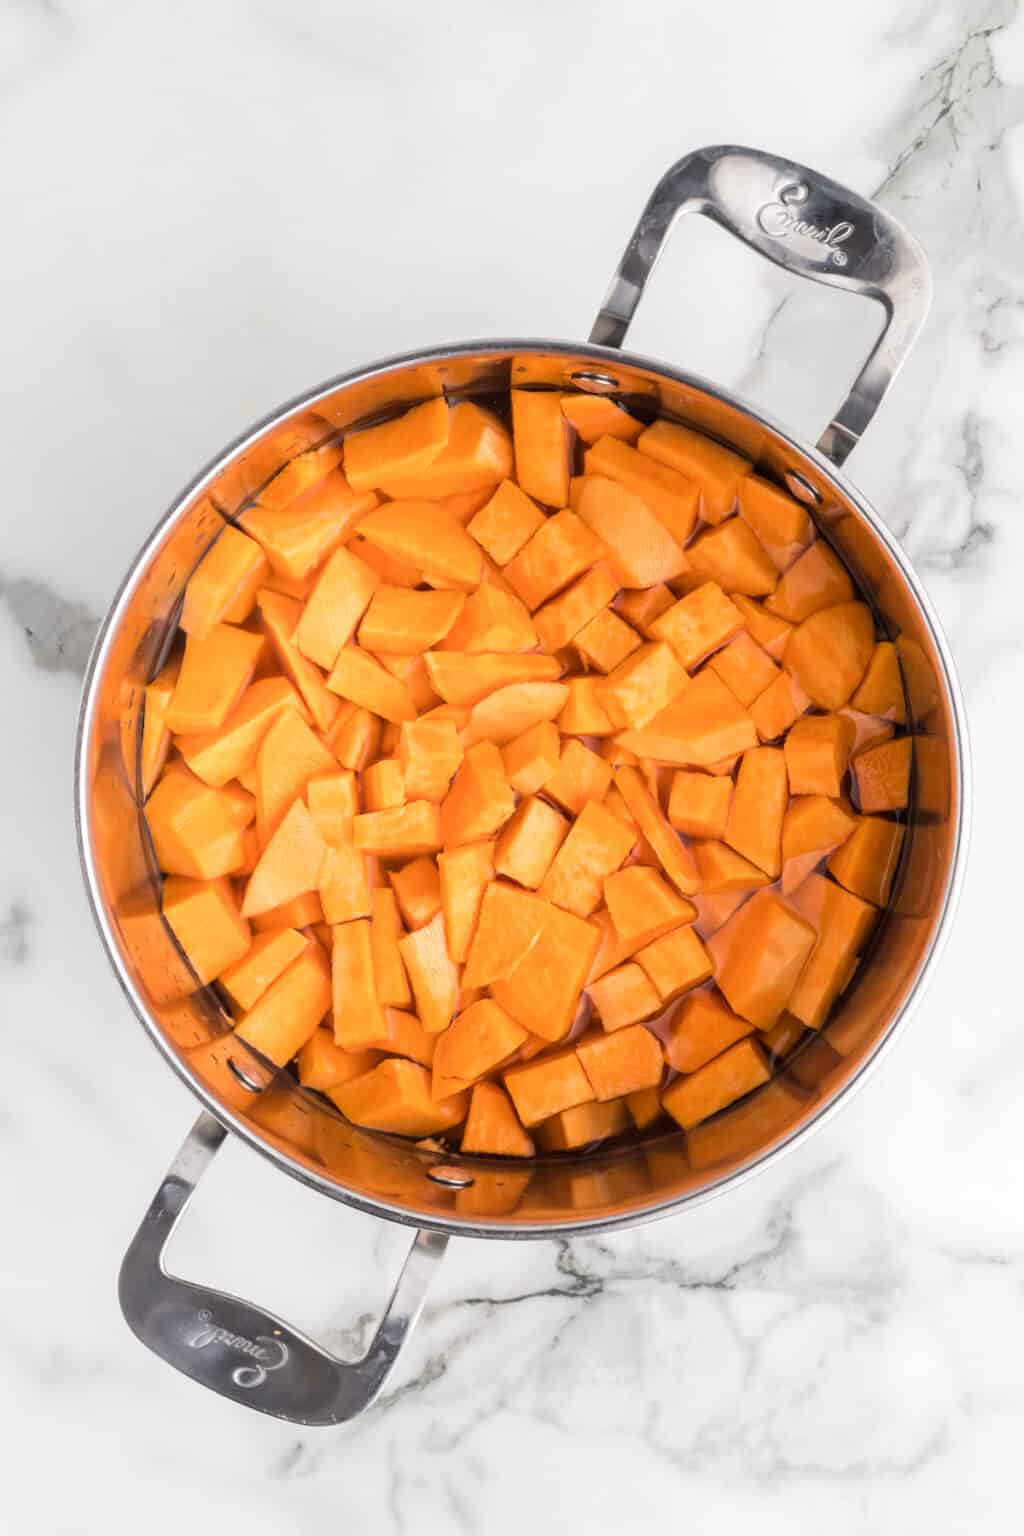 Healthy Mashed Sweet Potatoes - Boots & Hooves Homestead